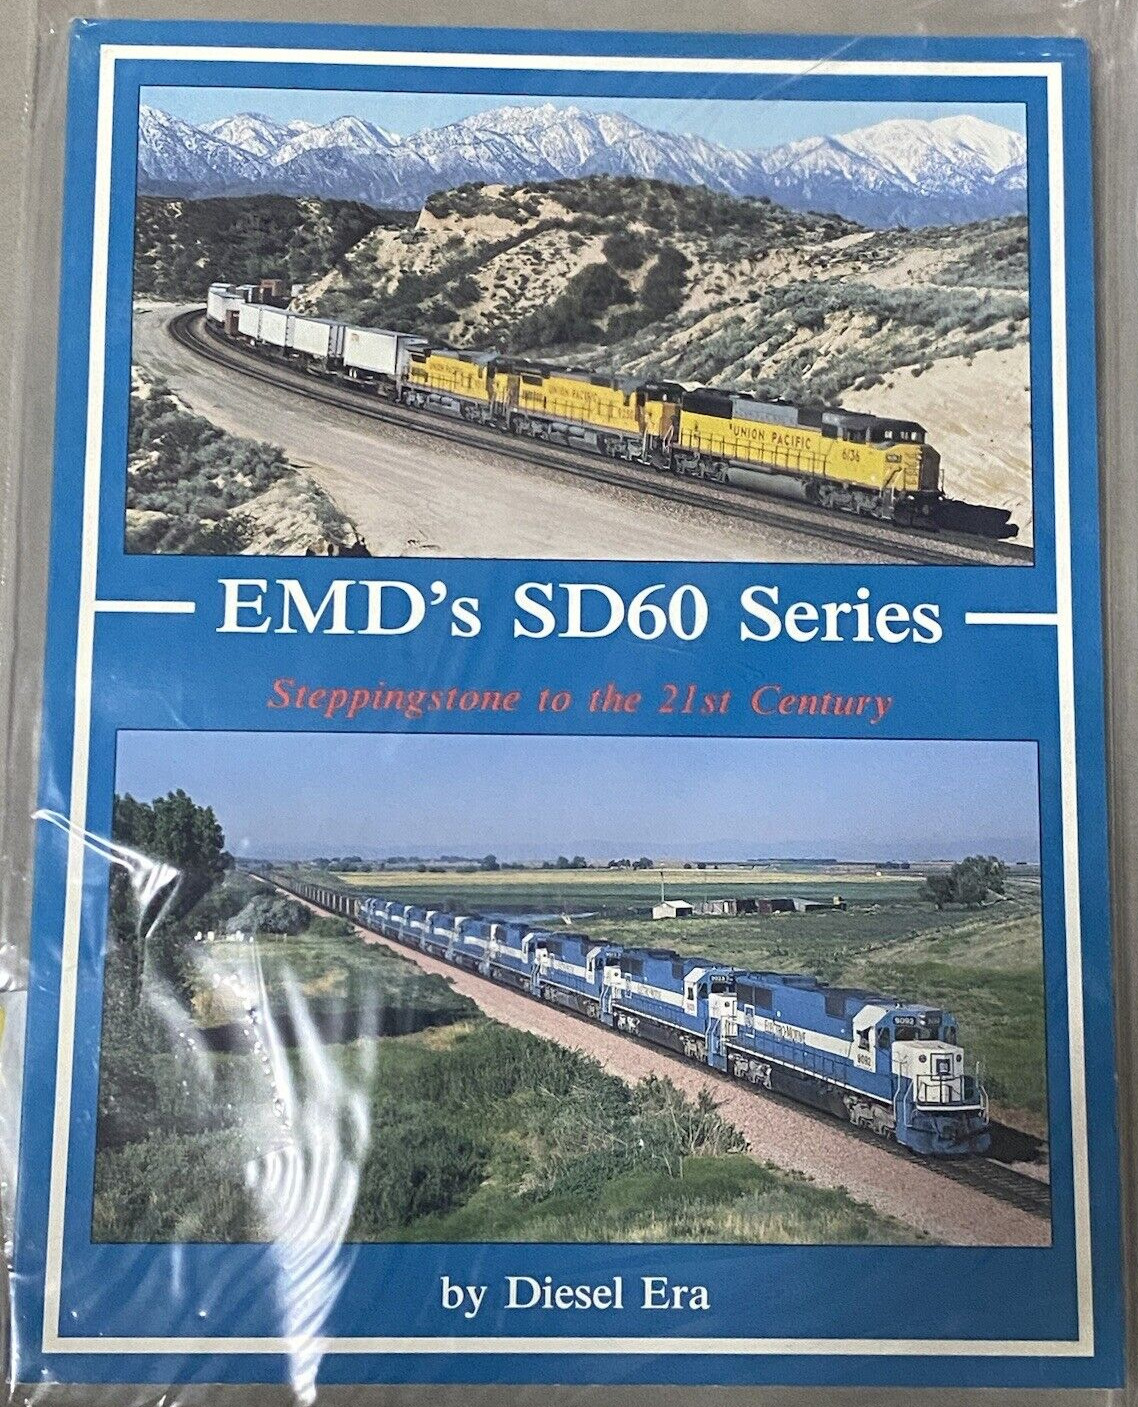 Sealed Diesel Era EMD's SD60 Series: Stepping Stone to the 21st Century